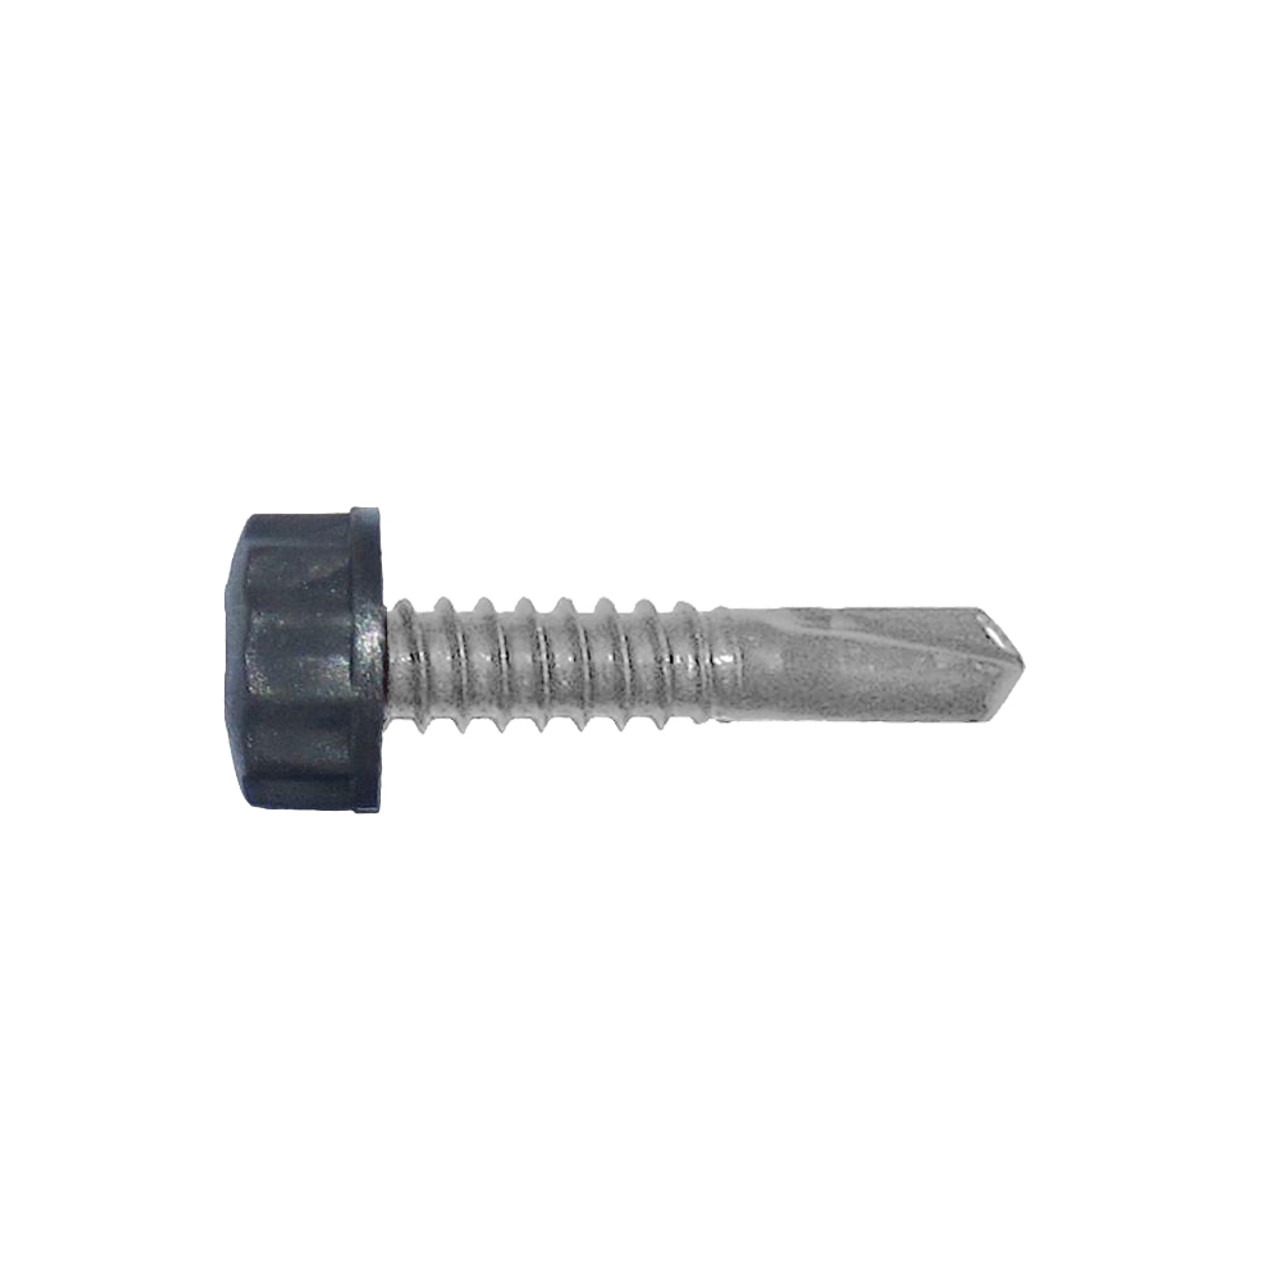 Nylo Tec self drilling screw SDS #10, #12, #14 (100 pack) - A&S